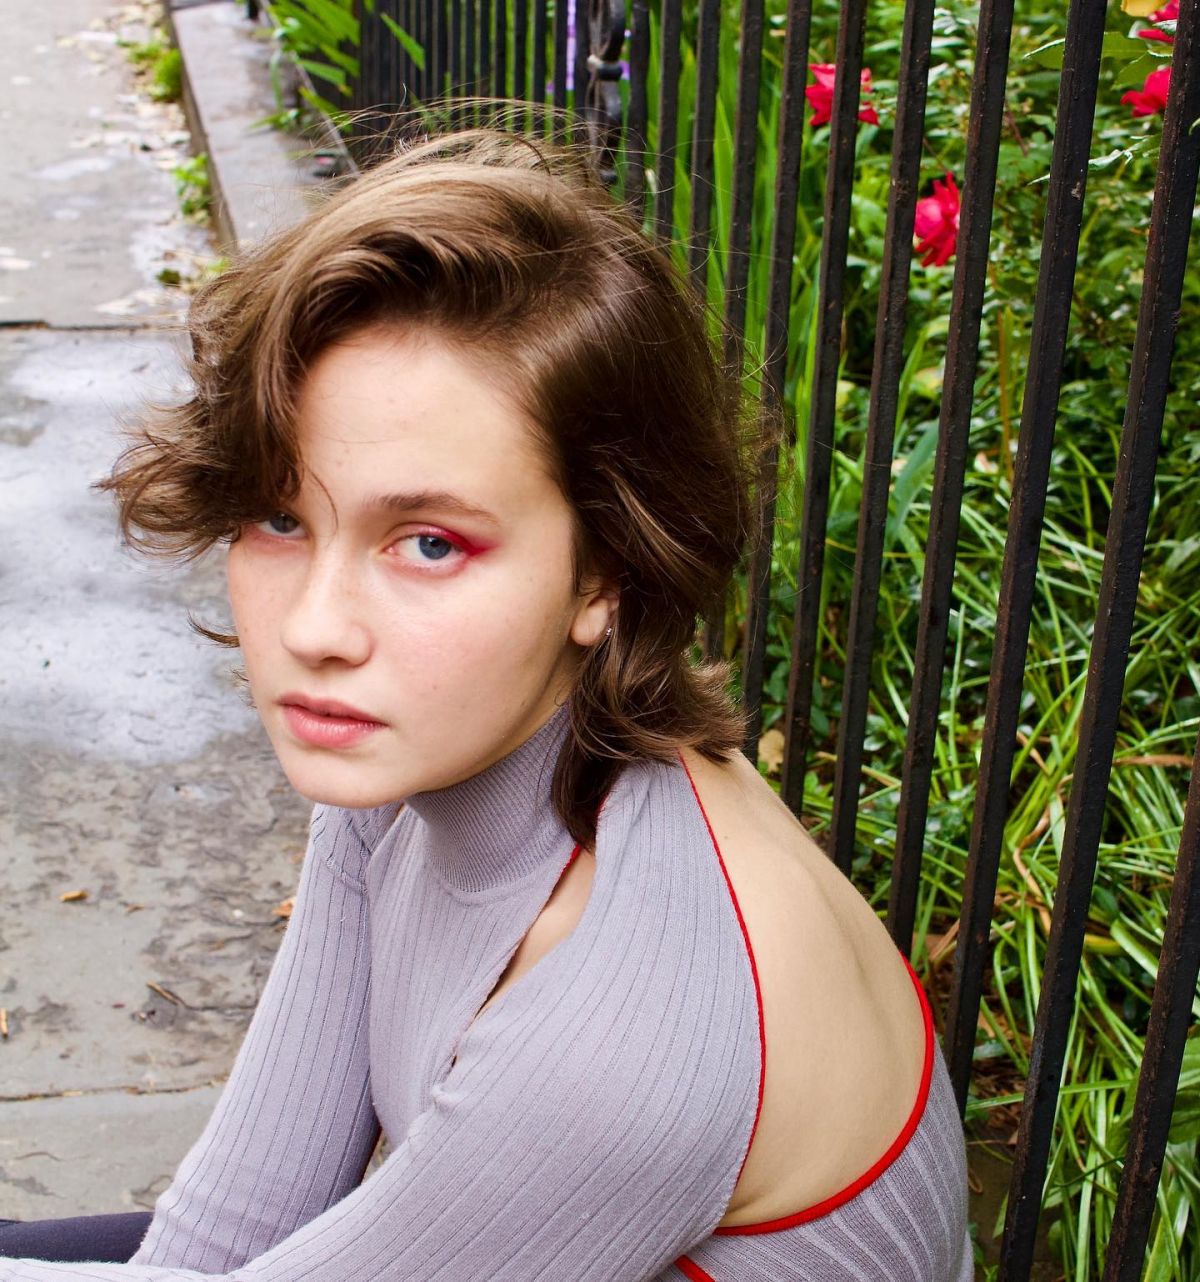 CAILEE SPAENY for The Bare Magazine, July 2021.